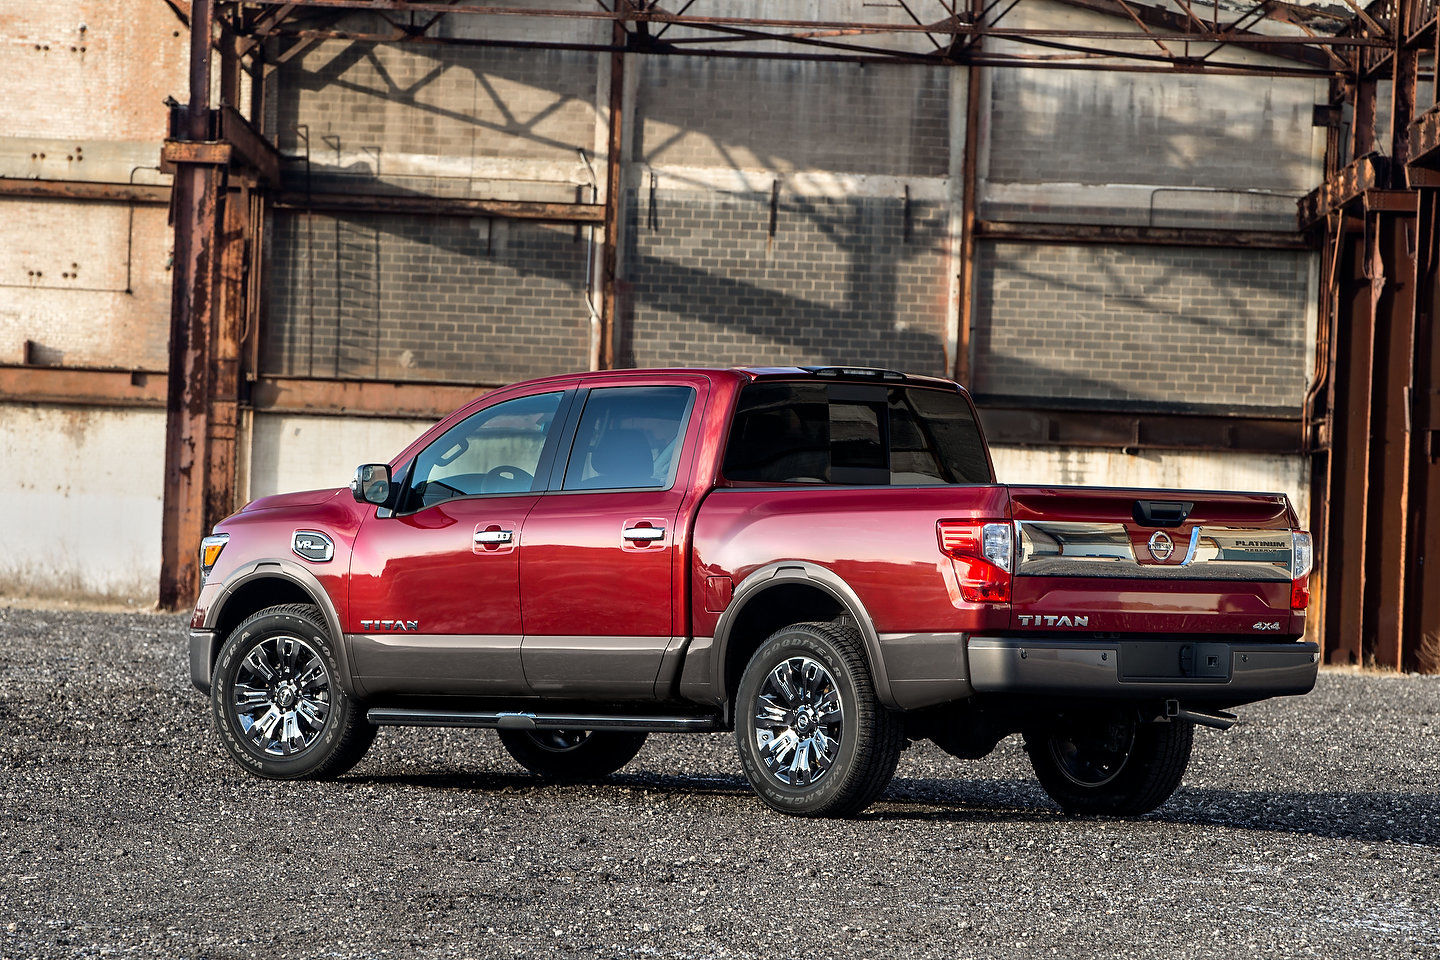 The 2019 Nissan Titan is designed to work